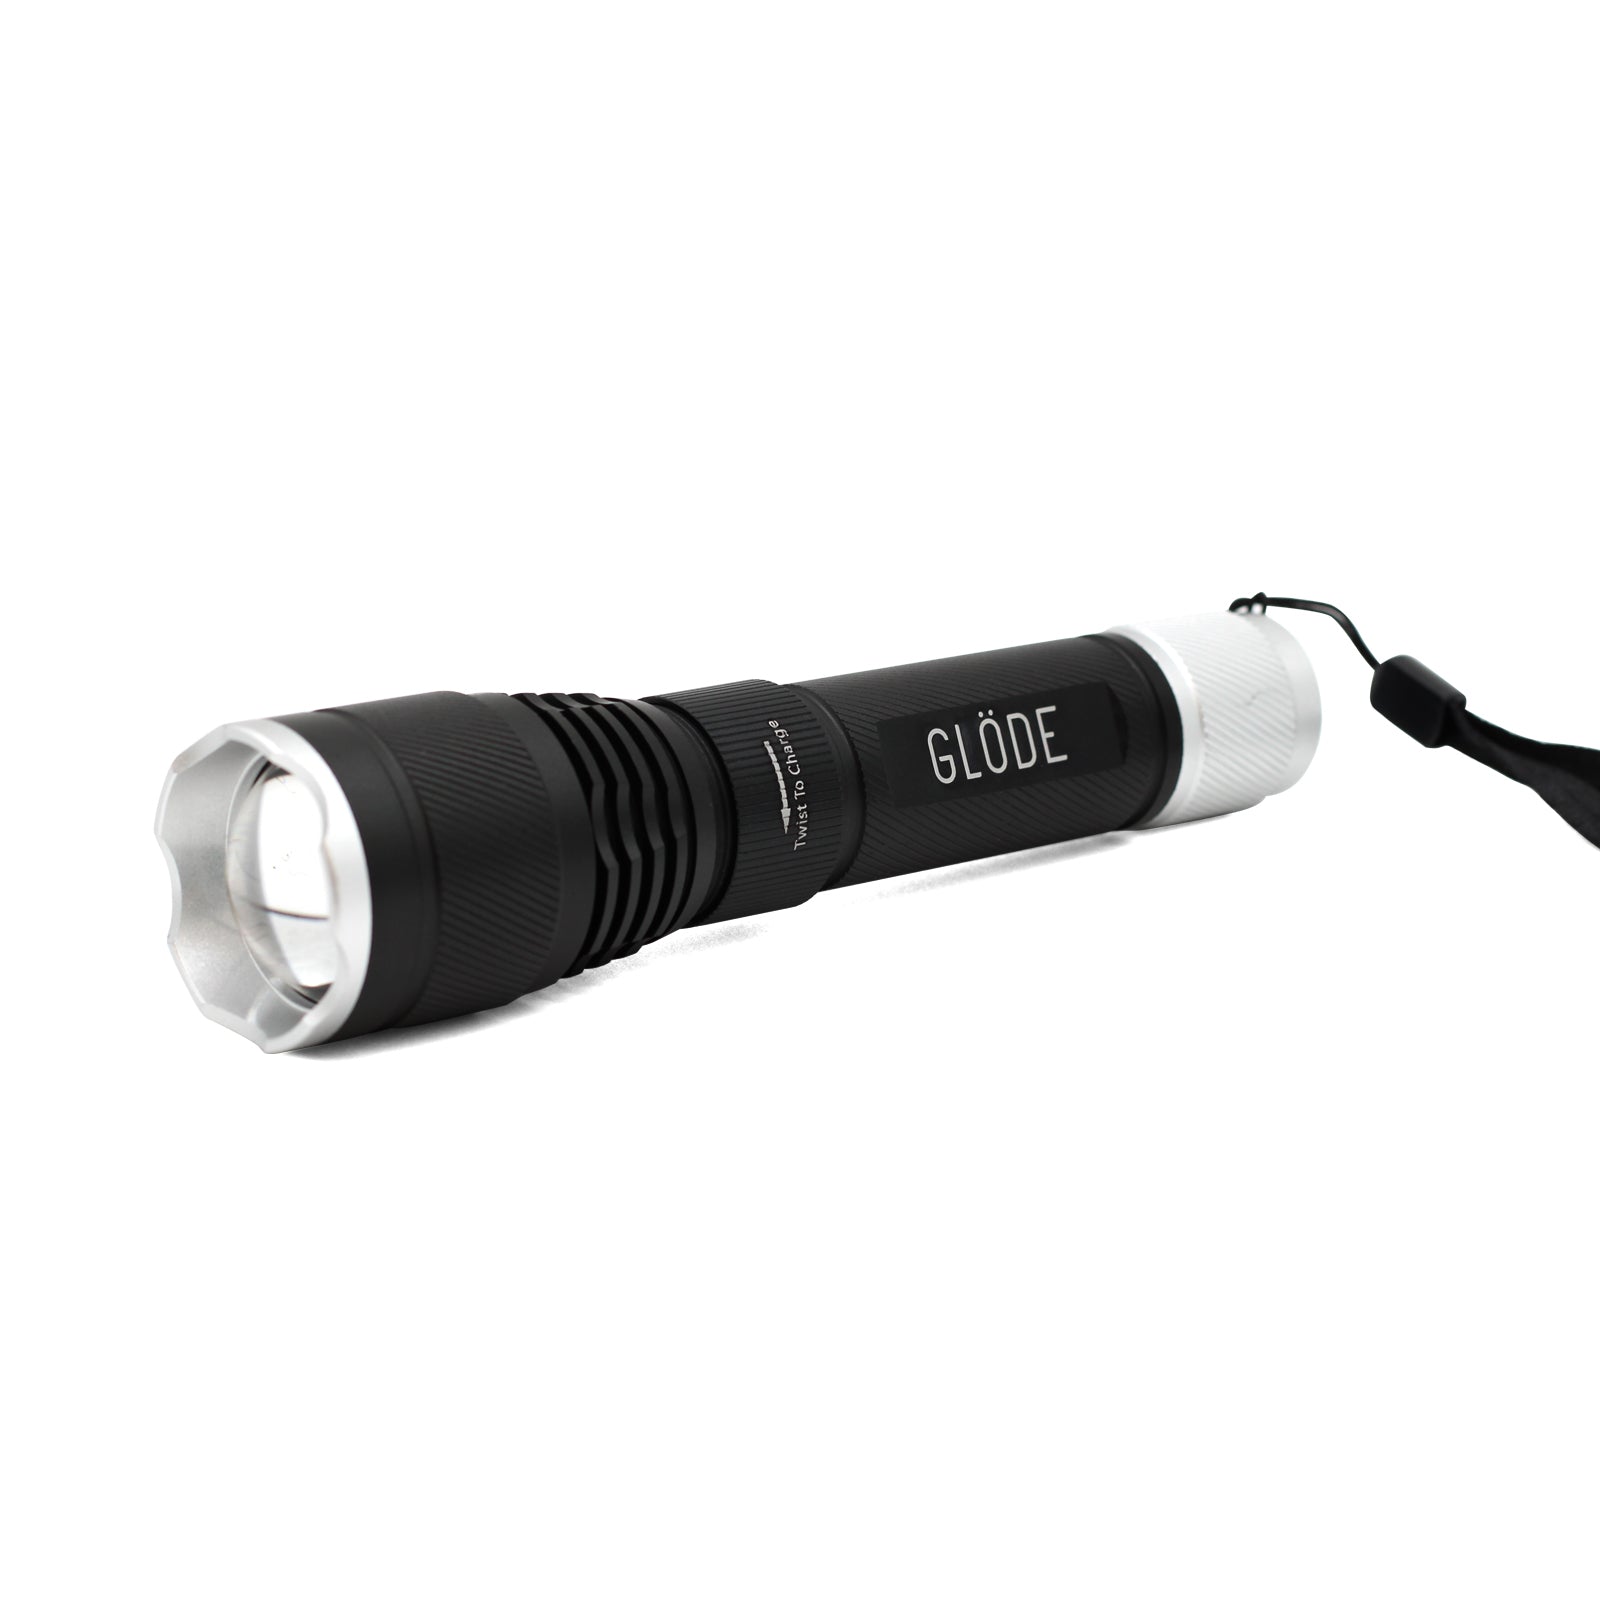 Glode Flashlight Rechargeable Cree LED Focus Beam Torch